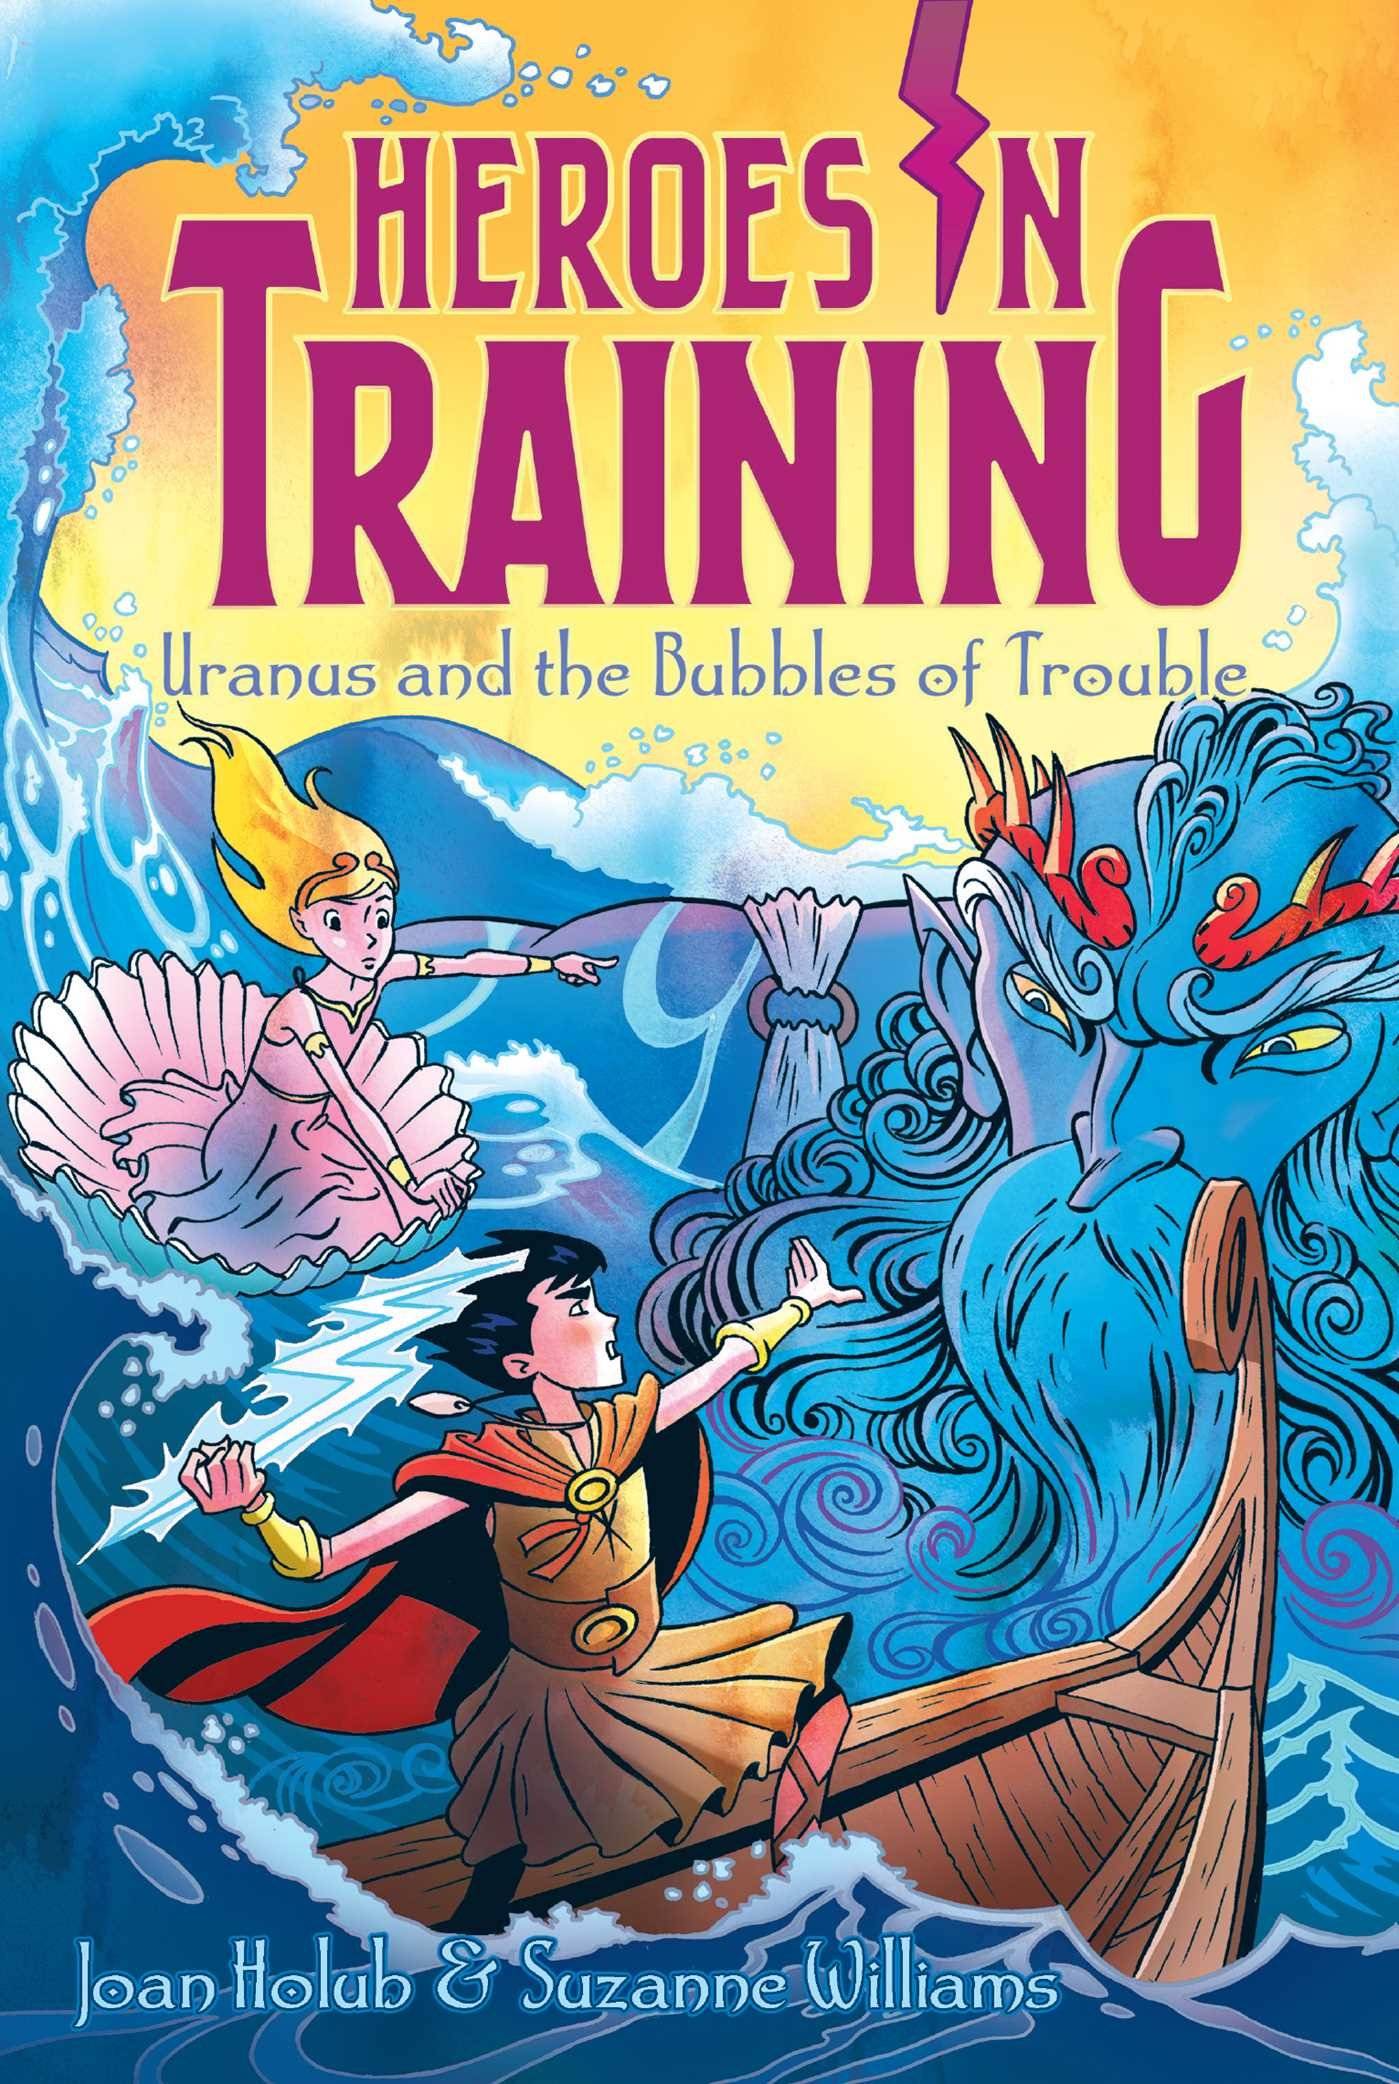 IMG : Heroes in Training Uranus and the bubbles of Troubles#11